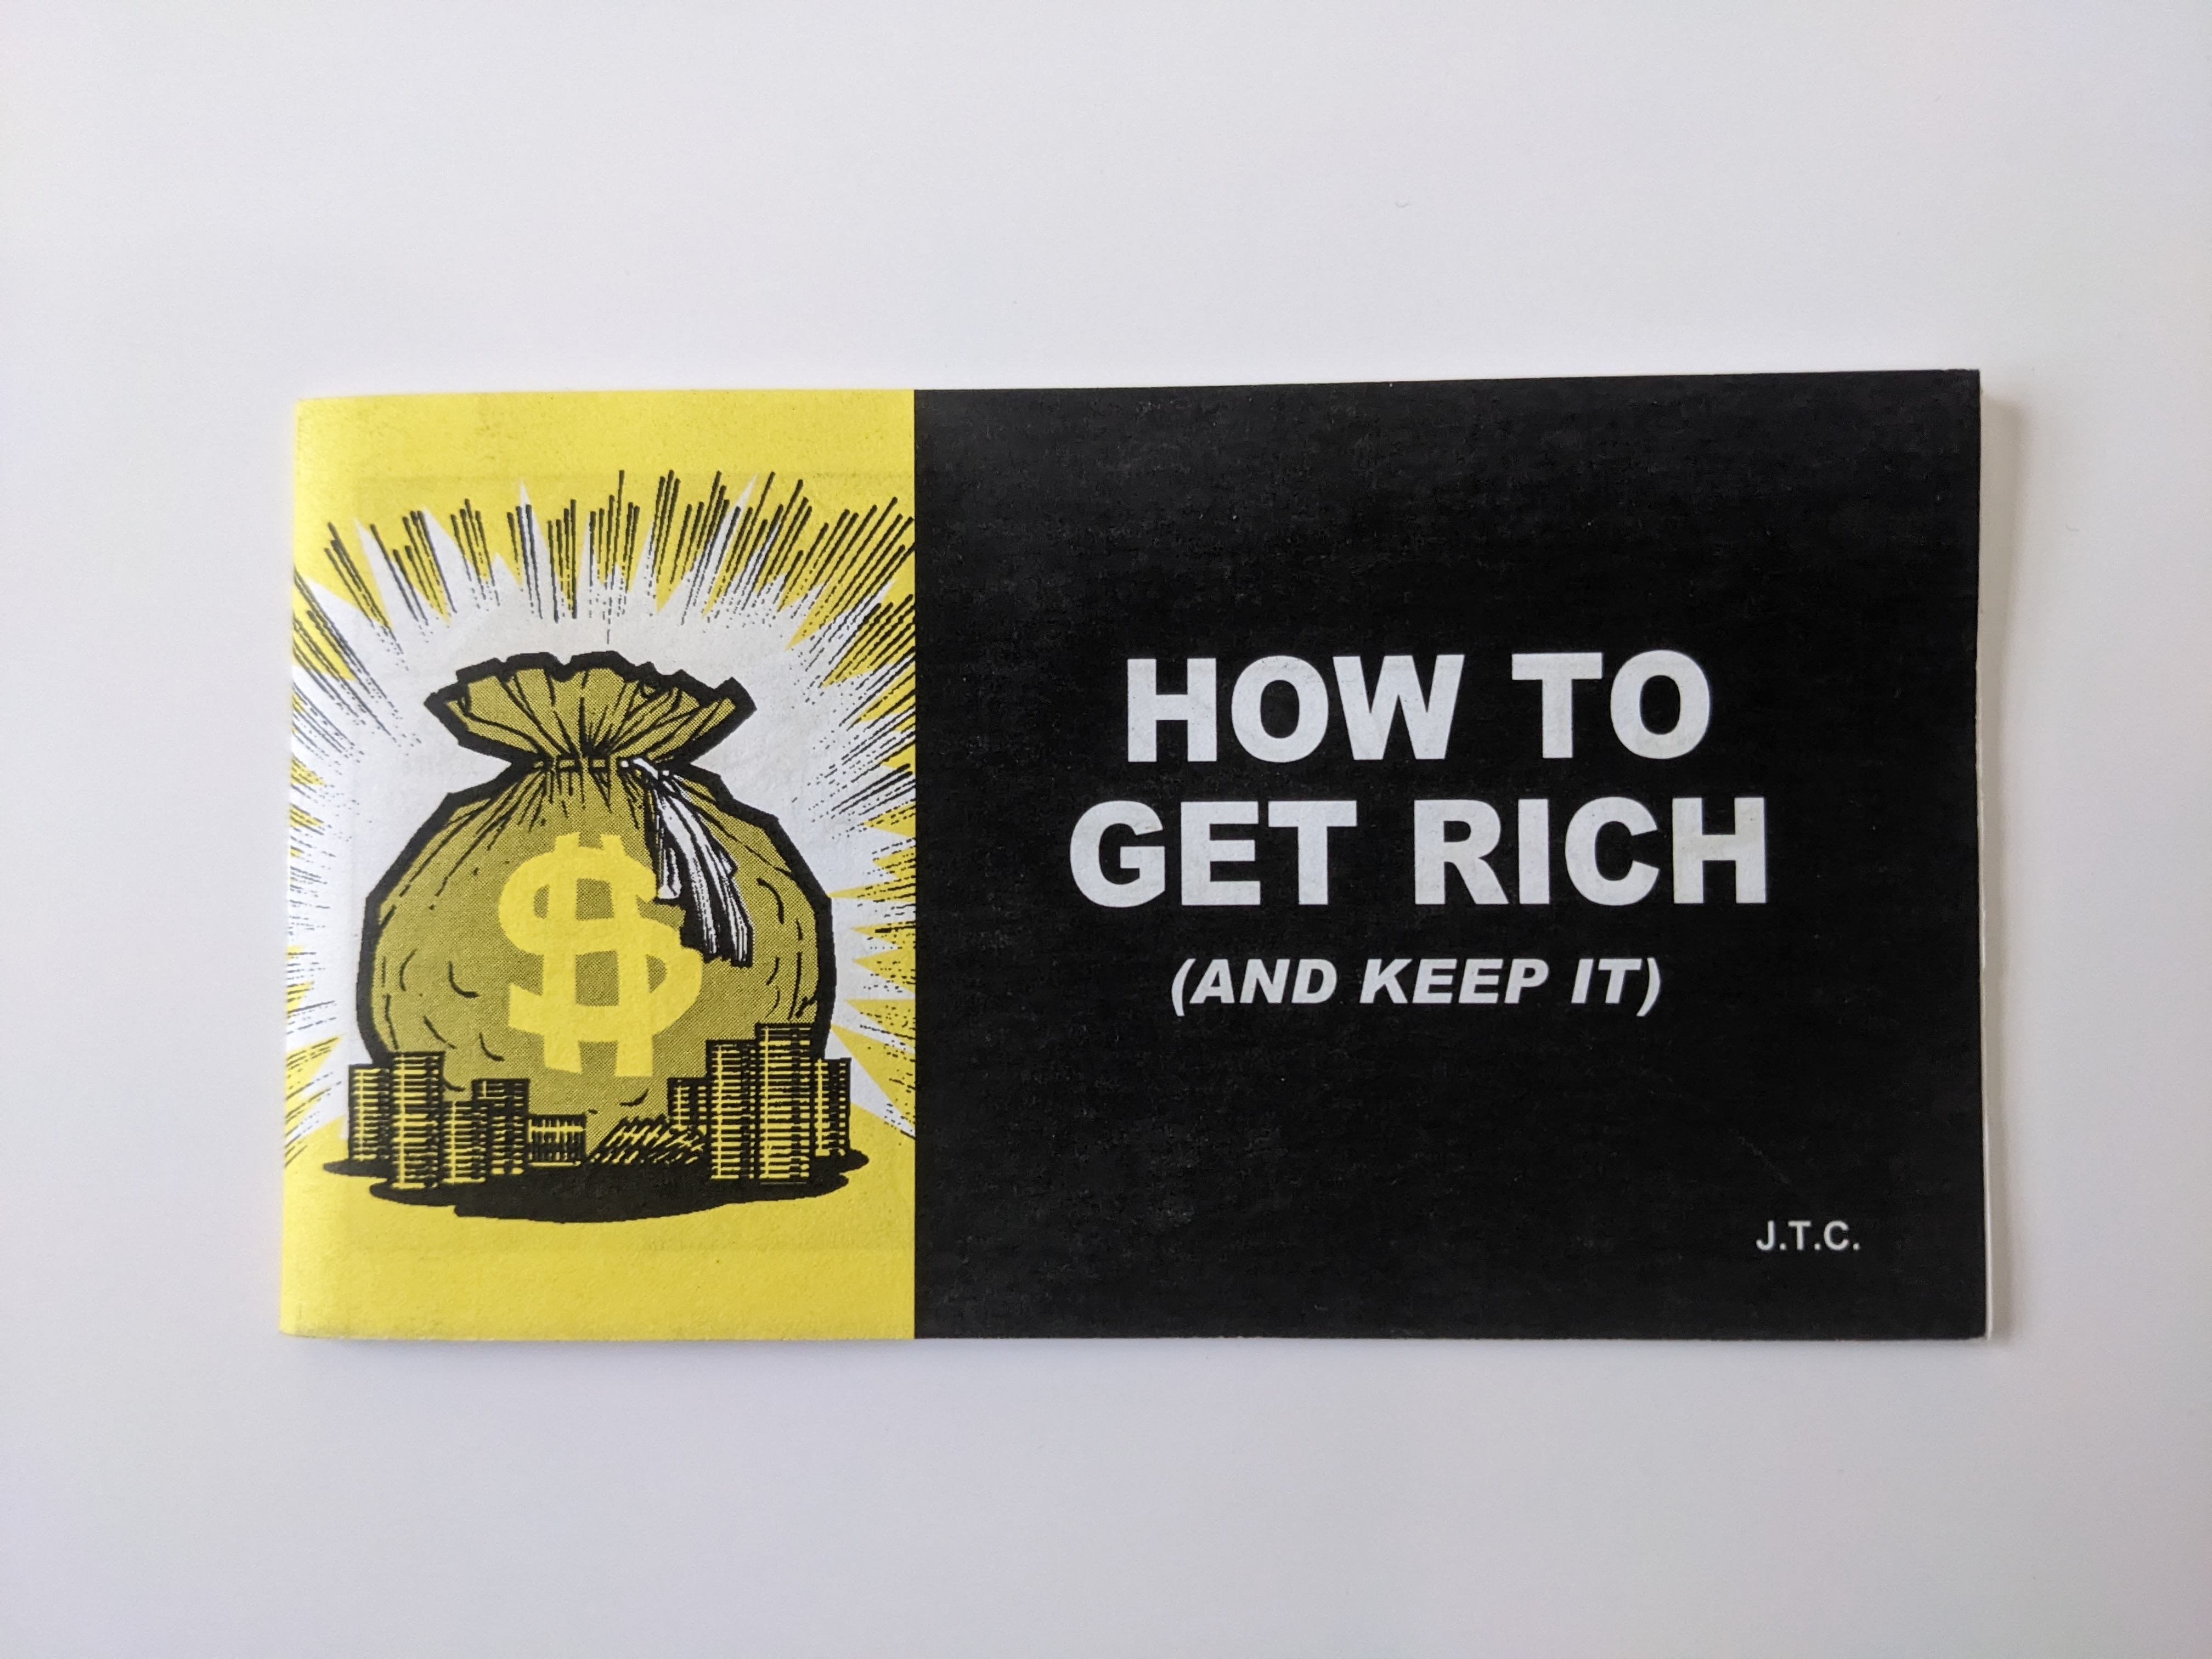 How to Get Rich (And Keep It)